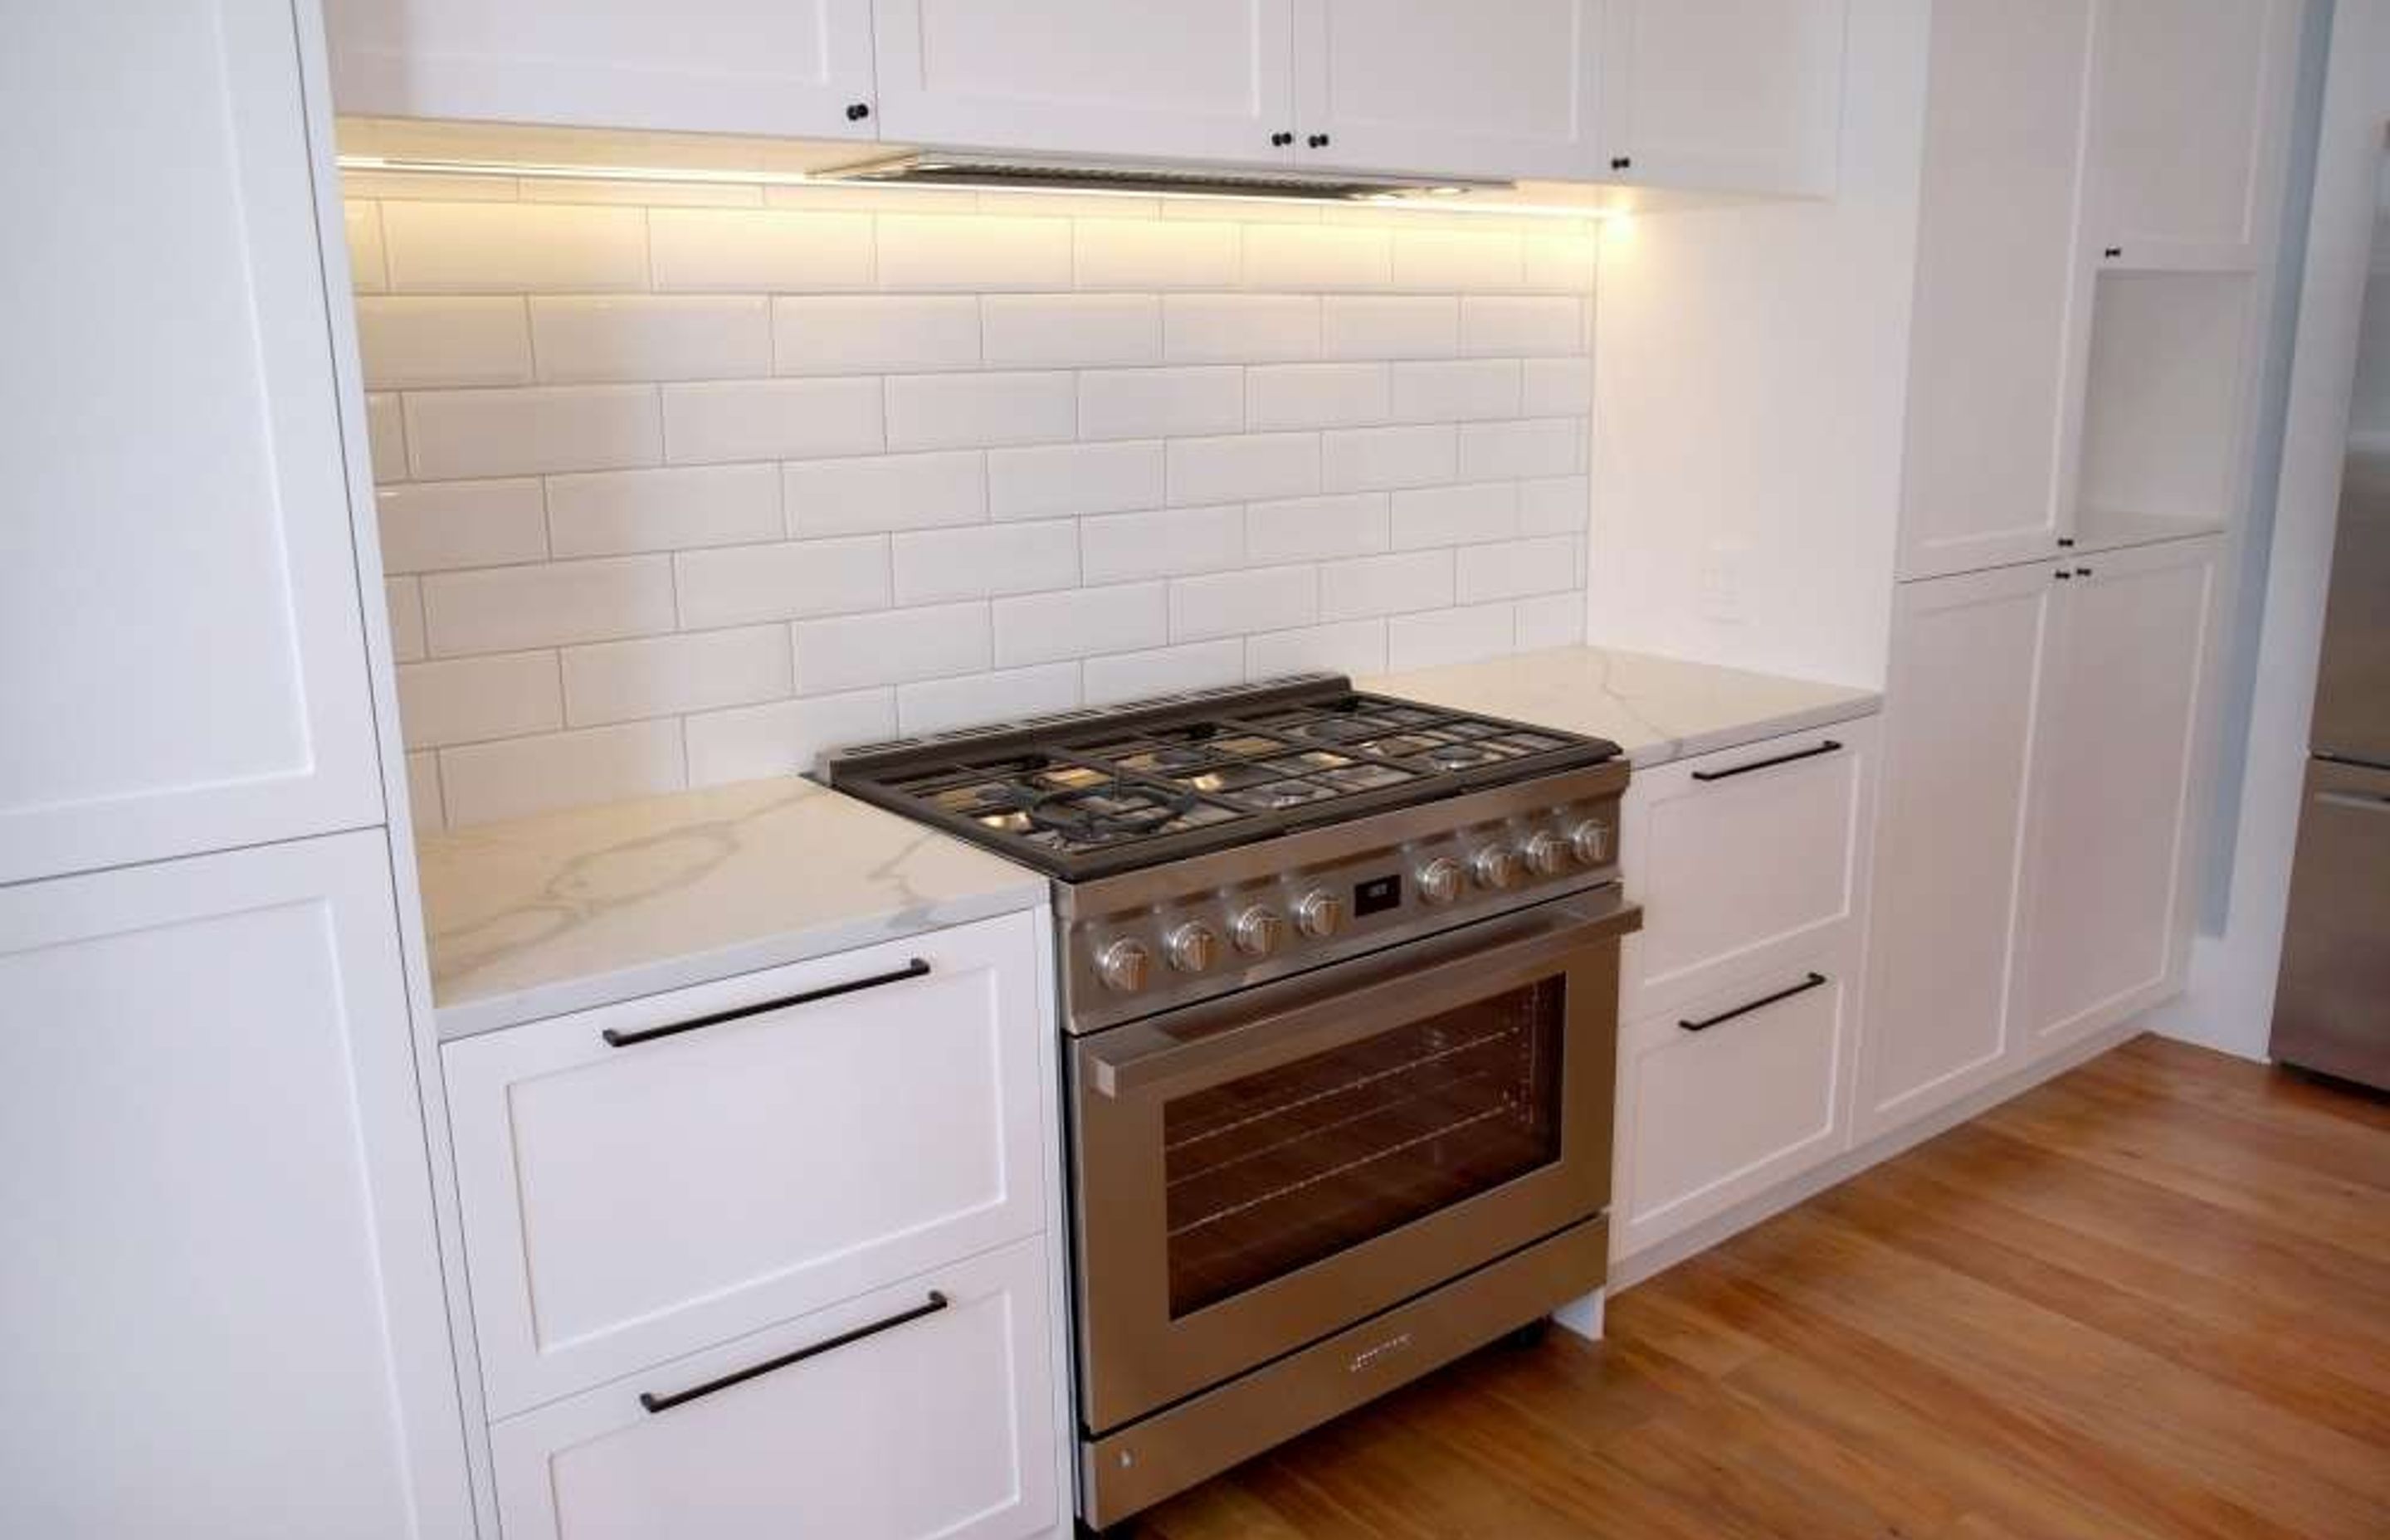 A grey cooking range was used with white subway tiles as a backsplash for a timeless classic design – Kitchen renovation in Epsom